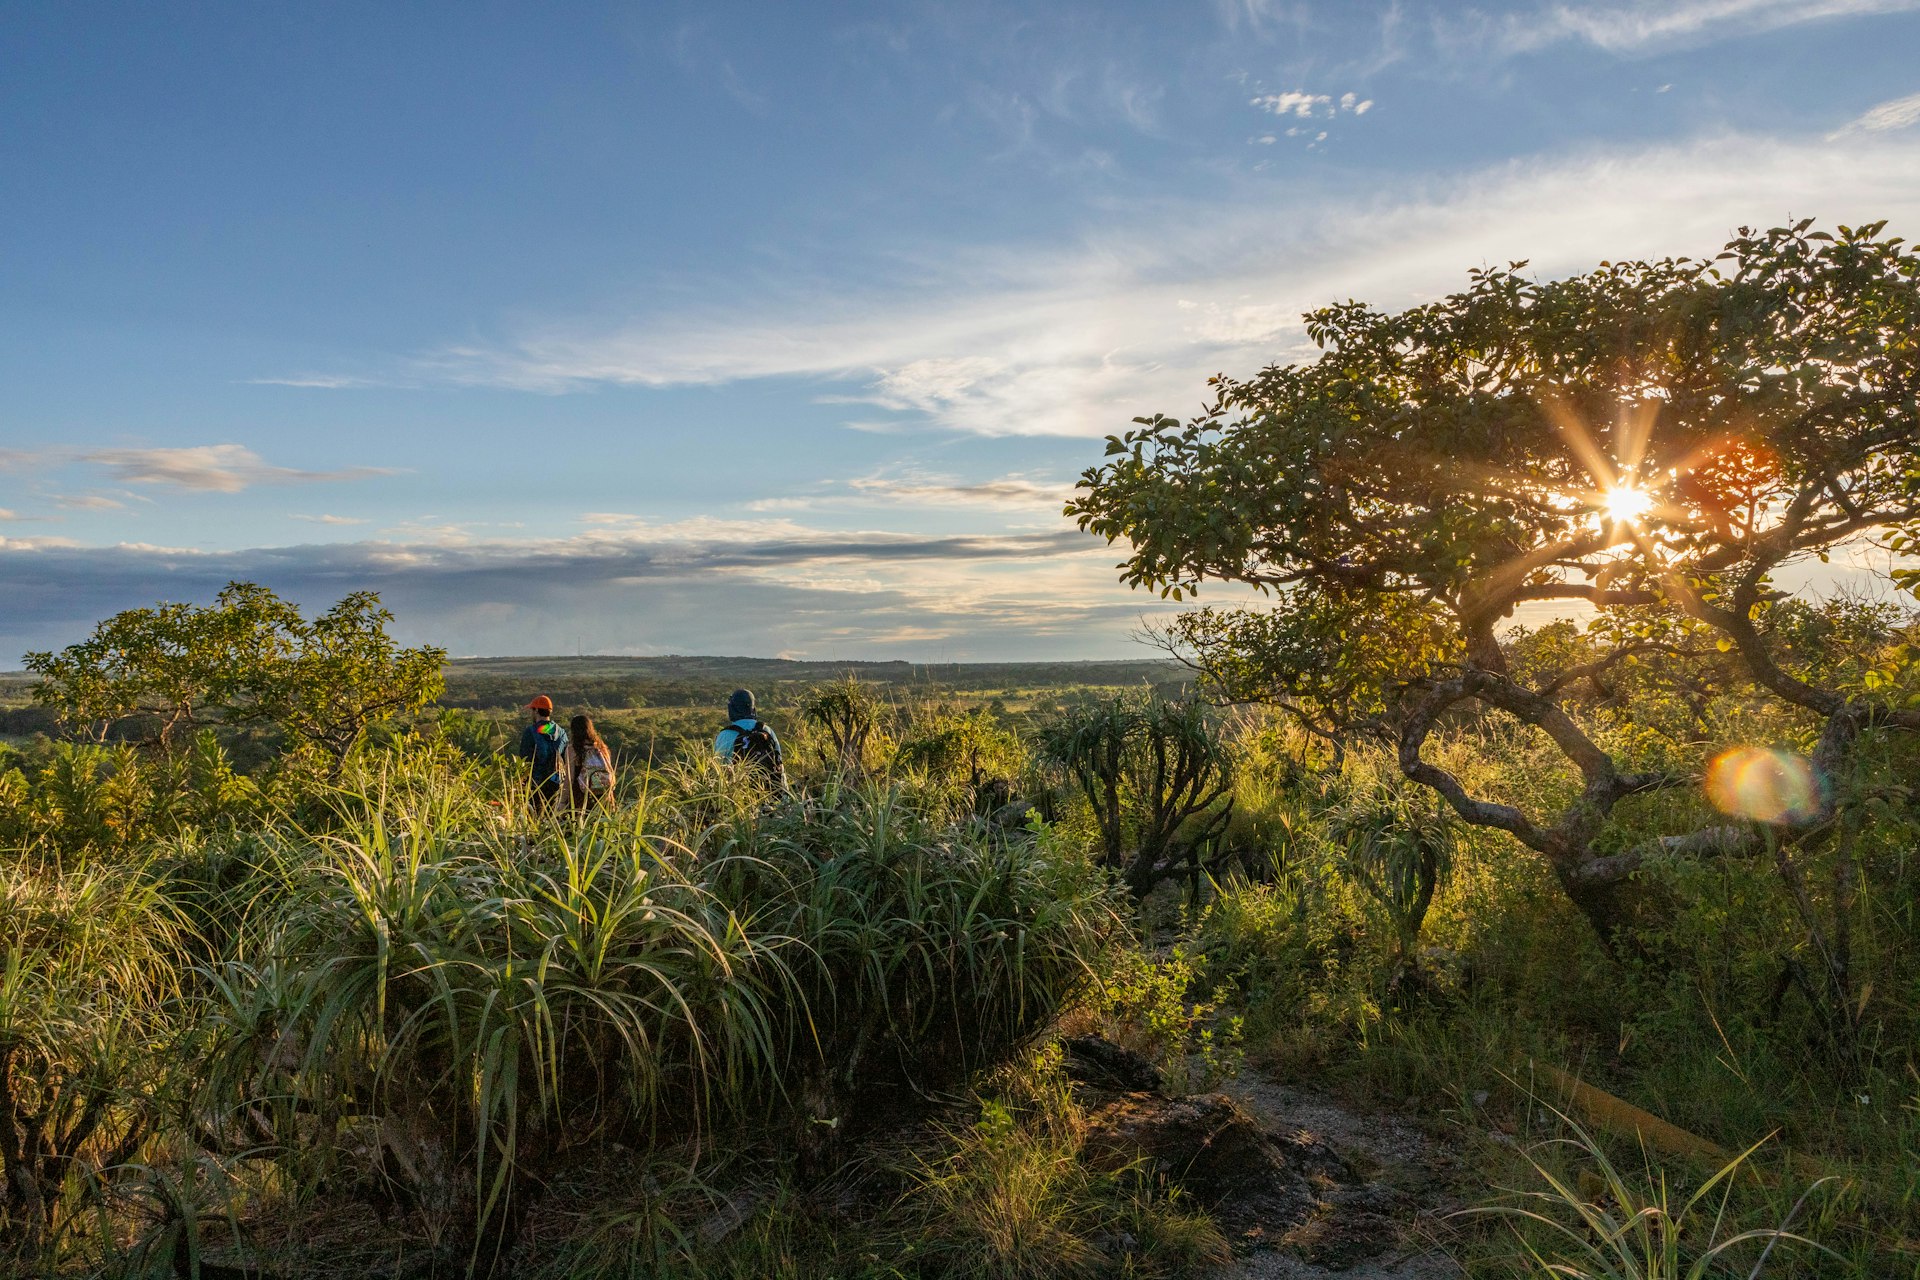 The sun lens flairs through a tree in the national park that surrounds the Canos Cristales river, illuminating the lush vegetation all around, almost as tall as the three hikers in the left side of the frame